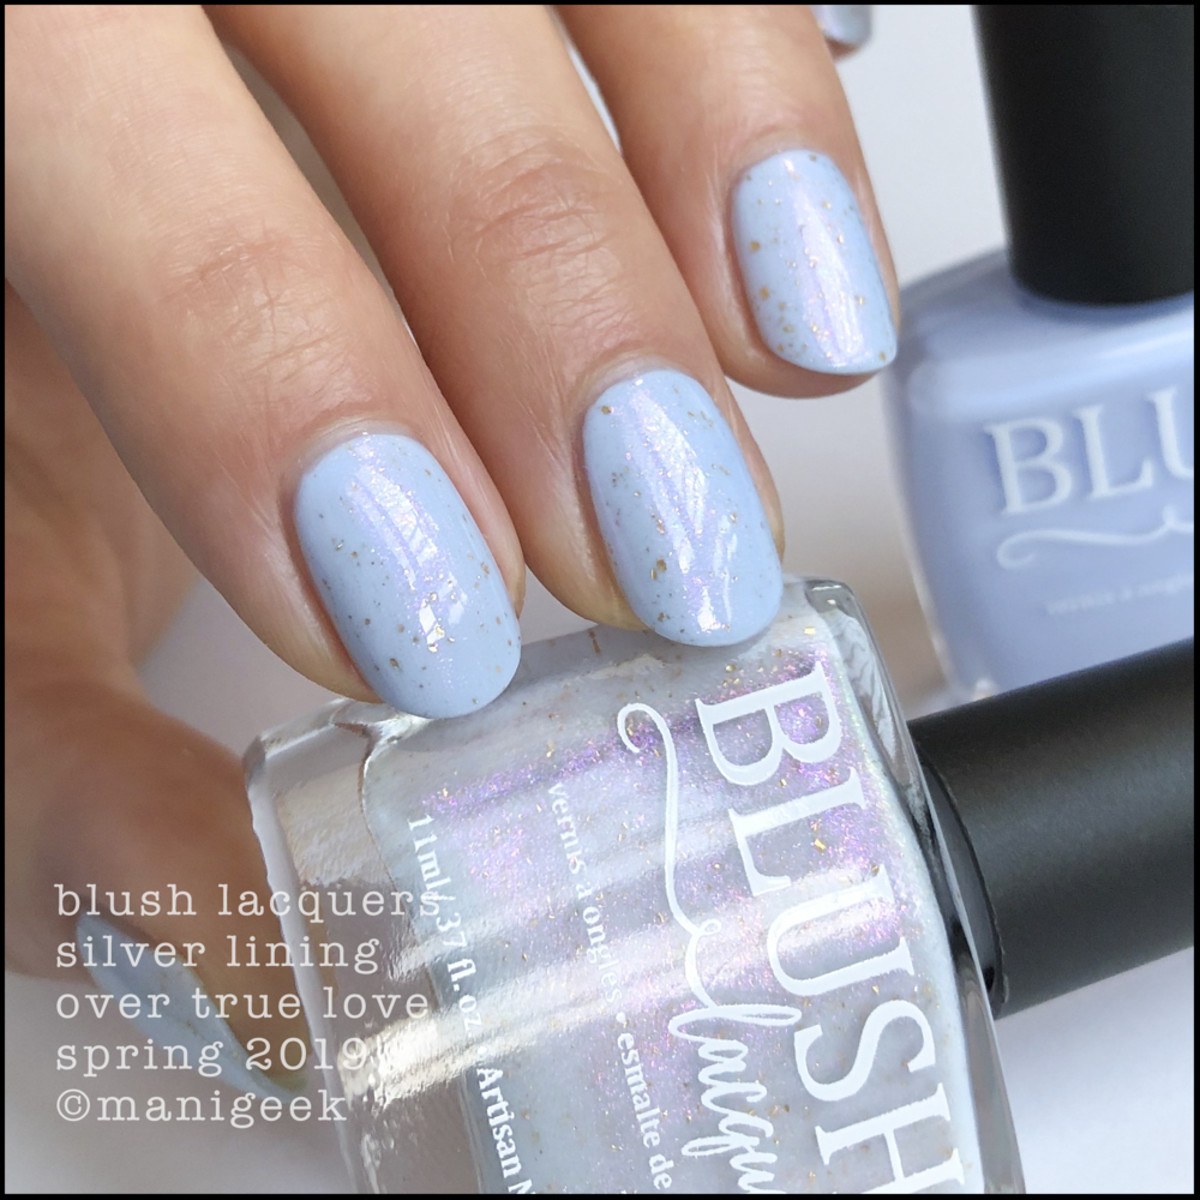 Blush Lacquers Silver Lining over True Love - Blush Lacquer Spring 2019